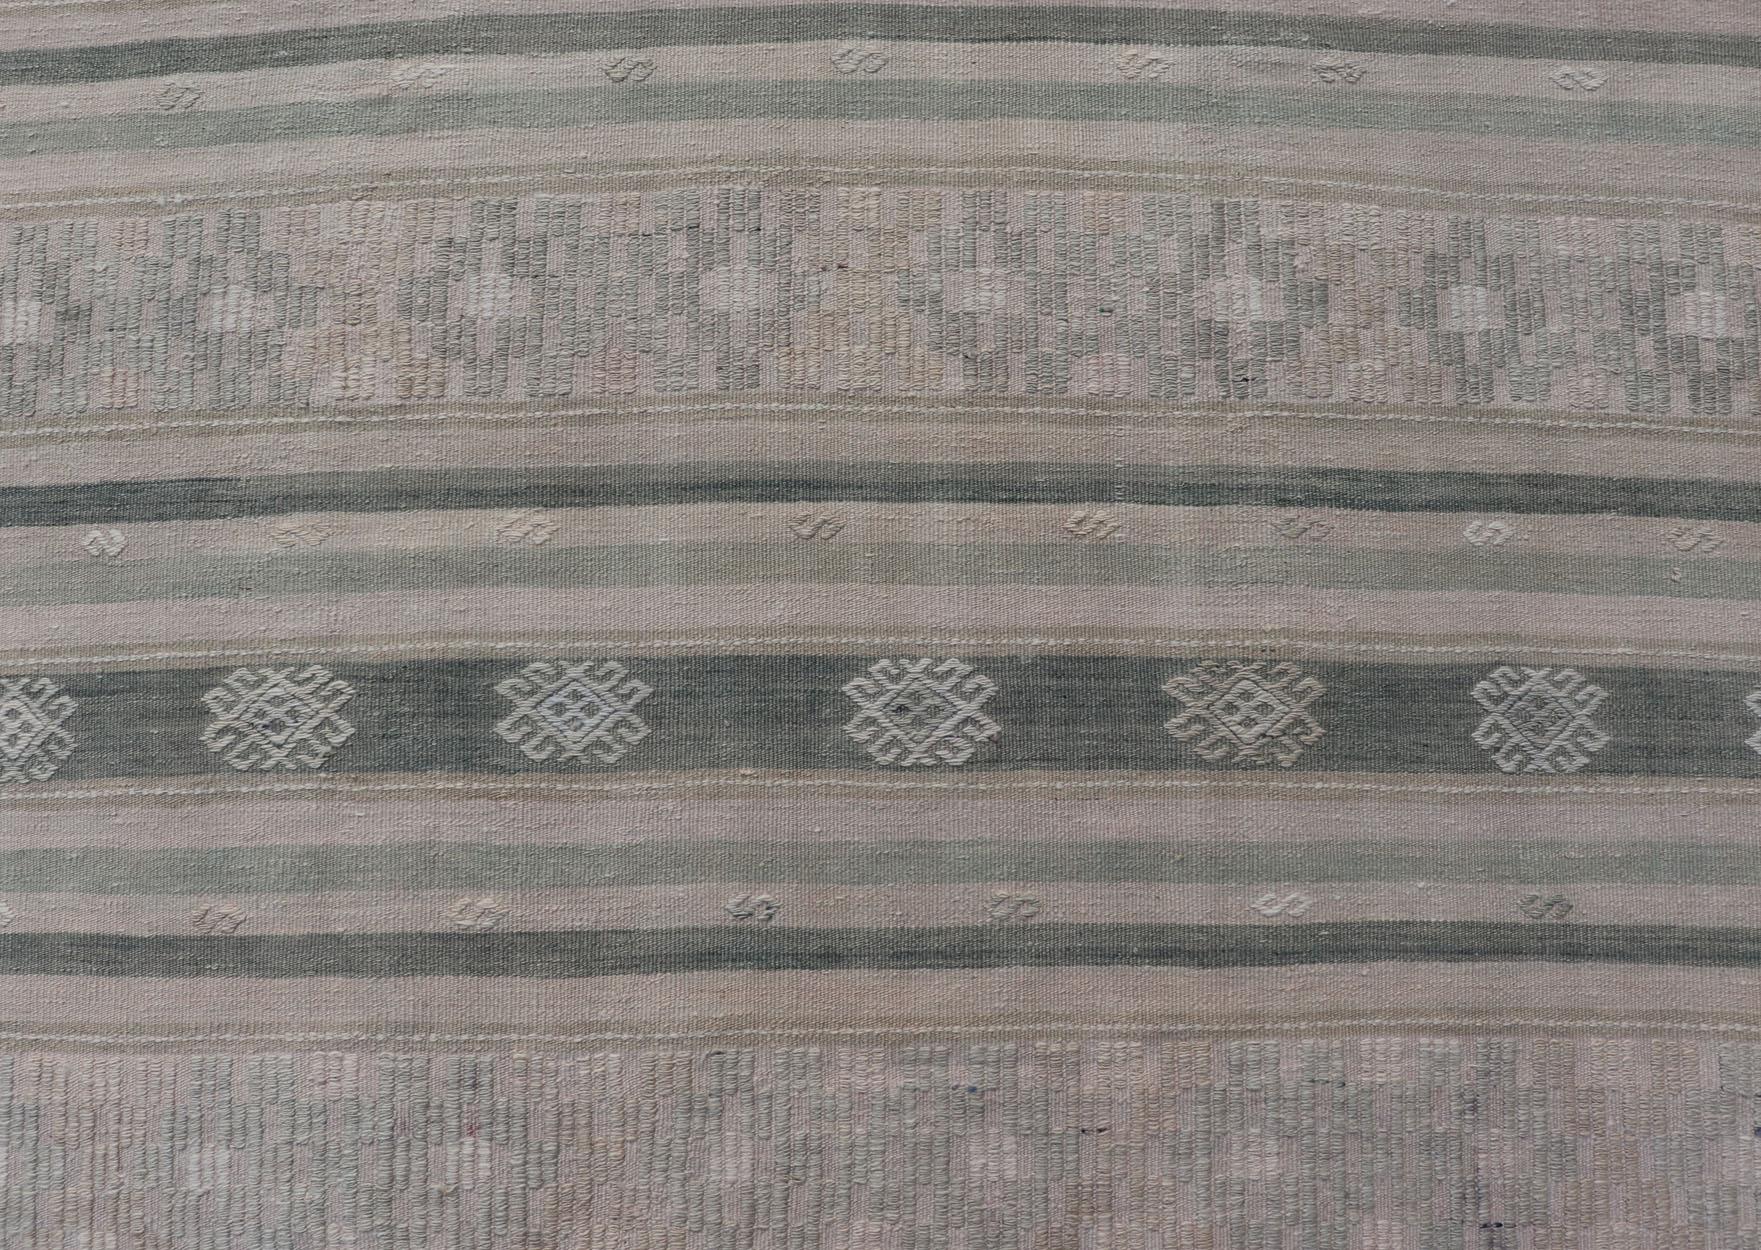 Measures: 5'9 x 9'0 
Flat-Weave Hand Woven Kilim with Embroideries in Taupe, Tan, Blue and Gray. Keivan Woven Arts / rug EN-14083, country of origin / type: Turkey / Kilim, circa 1950

This vintage Turkish Kilim rug features a contemporary geometric